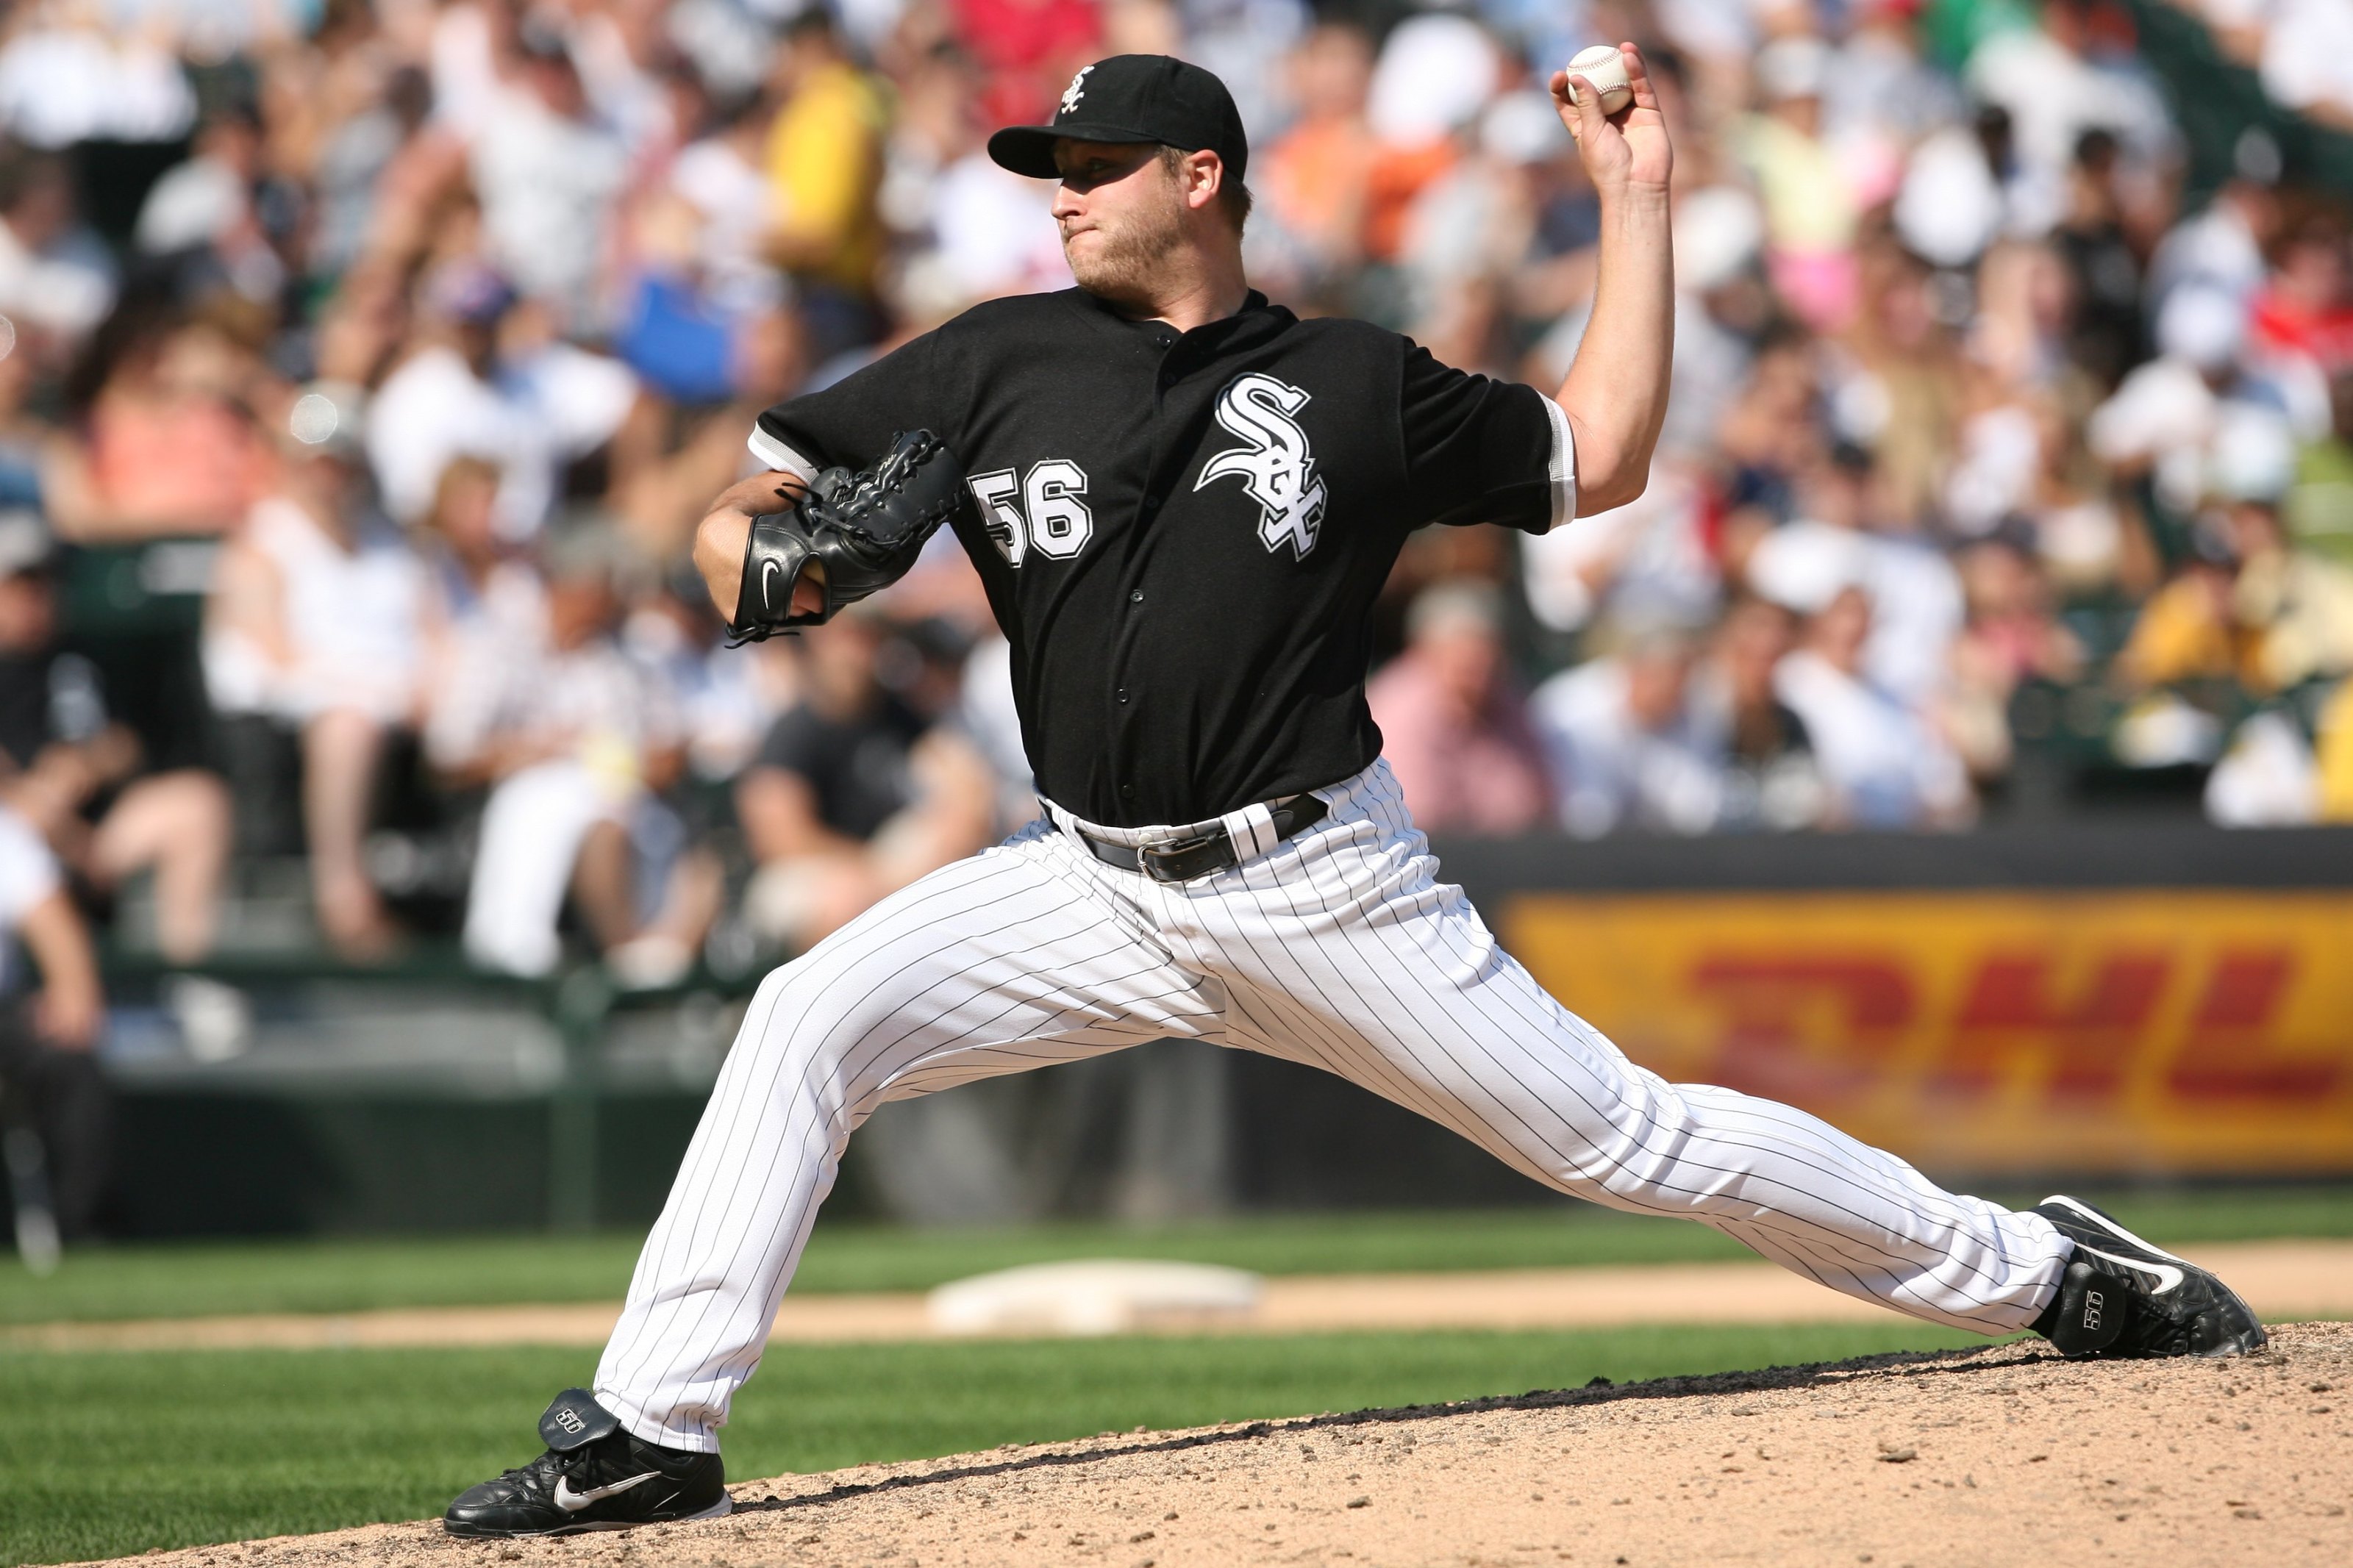 Where were you when Chicago White Sox star Mark Buehrle pitched a